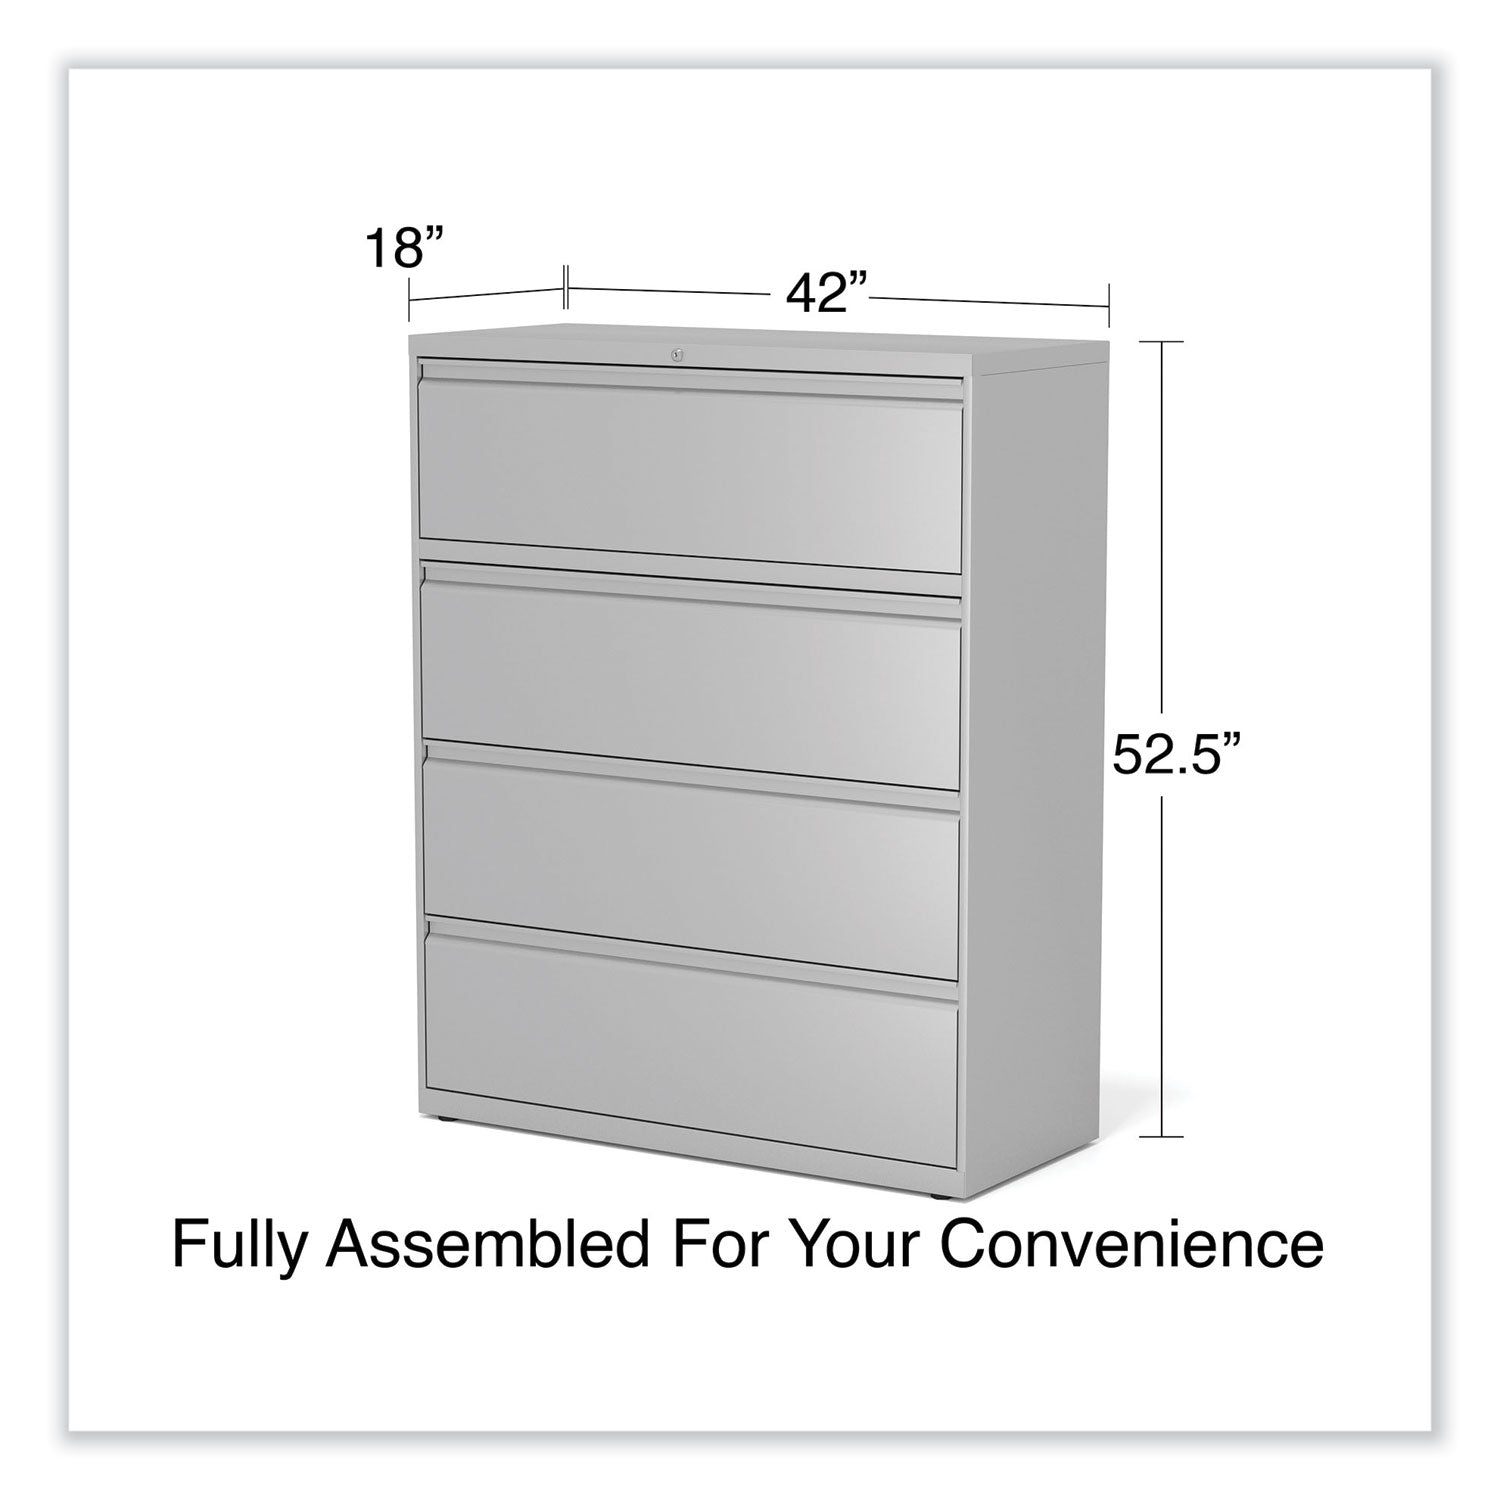 lateral-file-4-legal-letter-size-file-drawers-light-gray-42-x-1863-x-525_alehlf4254lg - 6